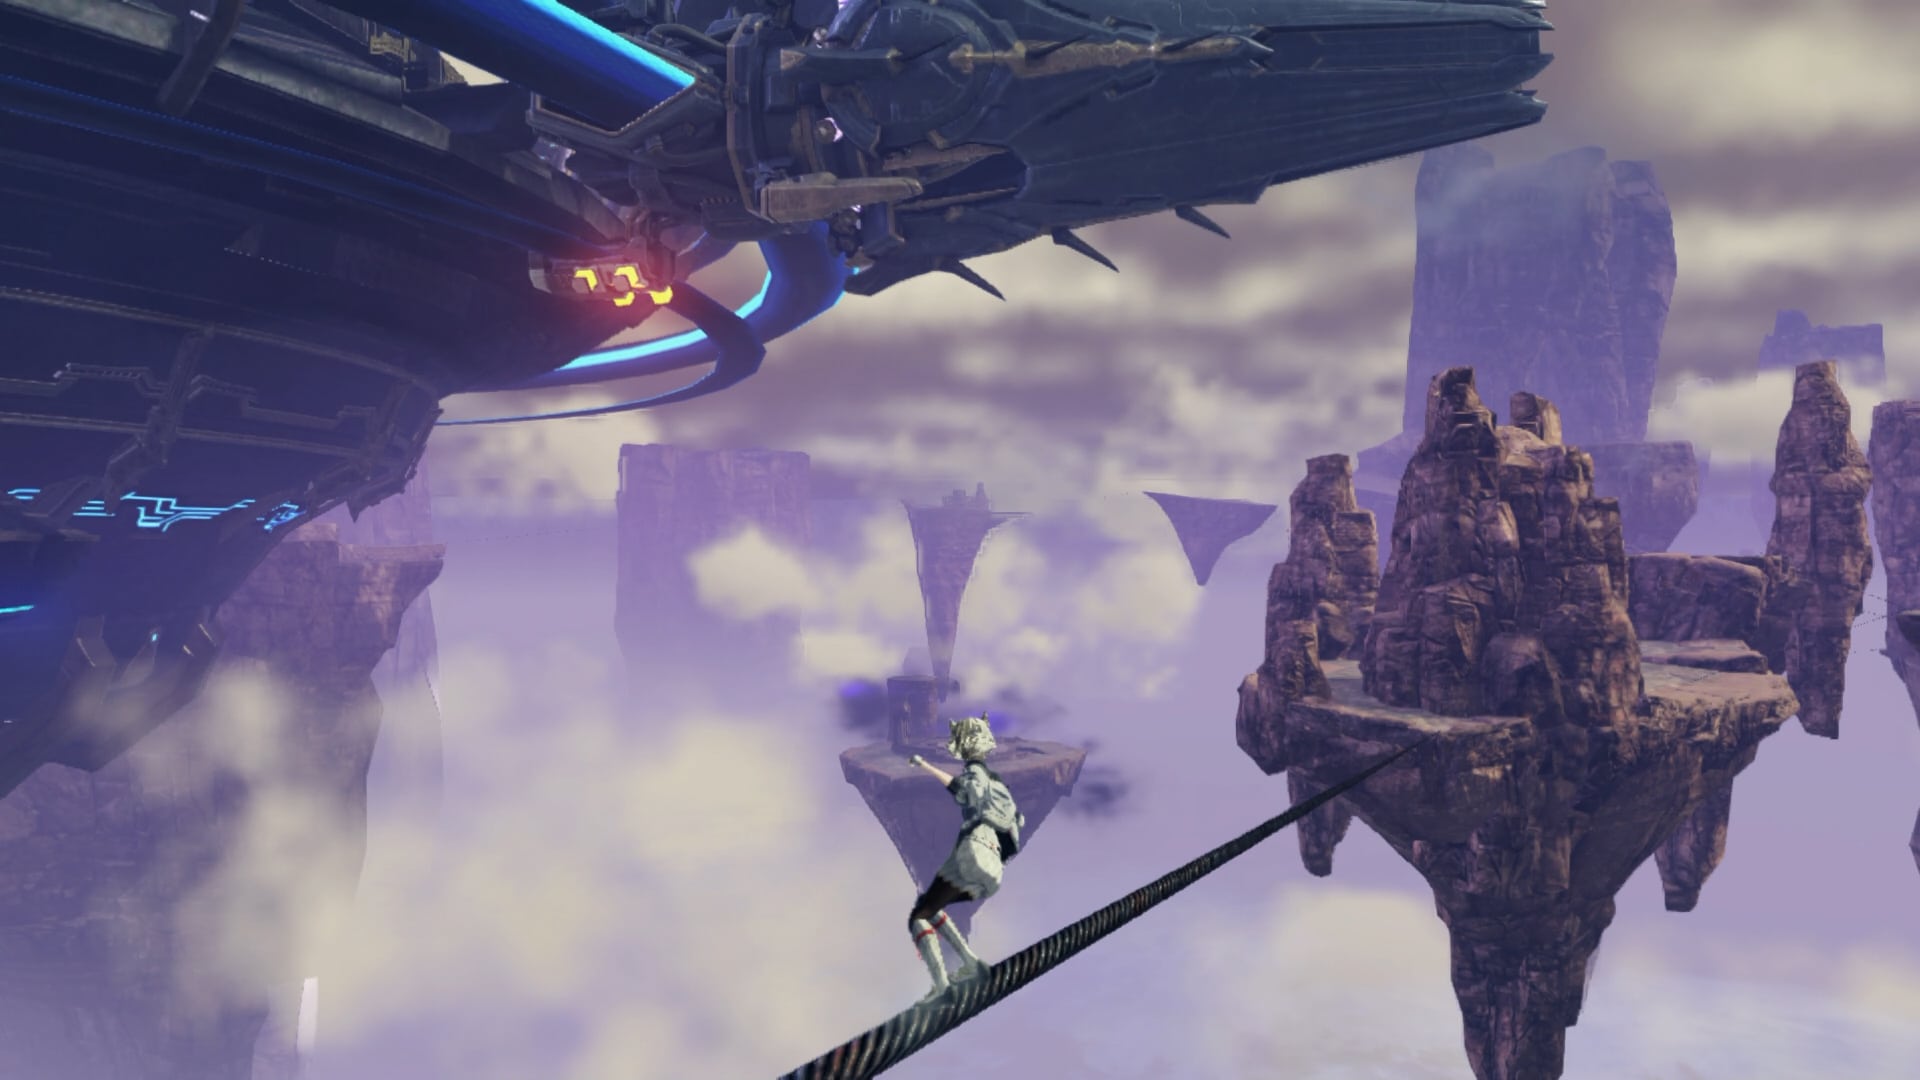 Xenoblade Chronicles 3 launches July 29